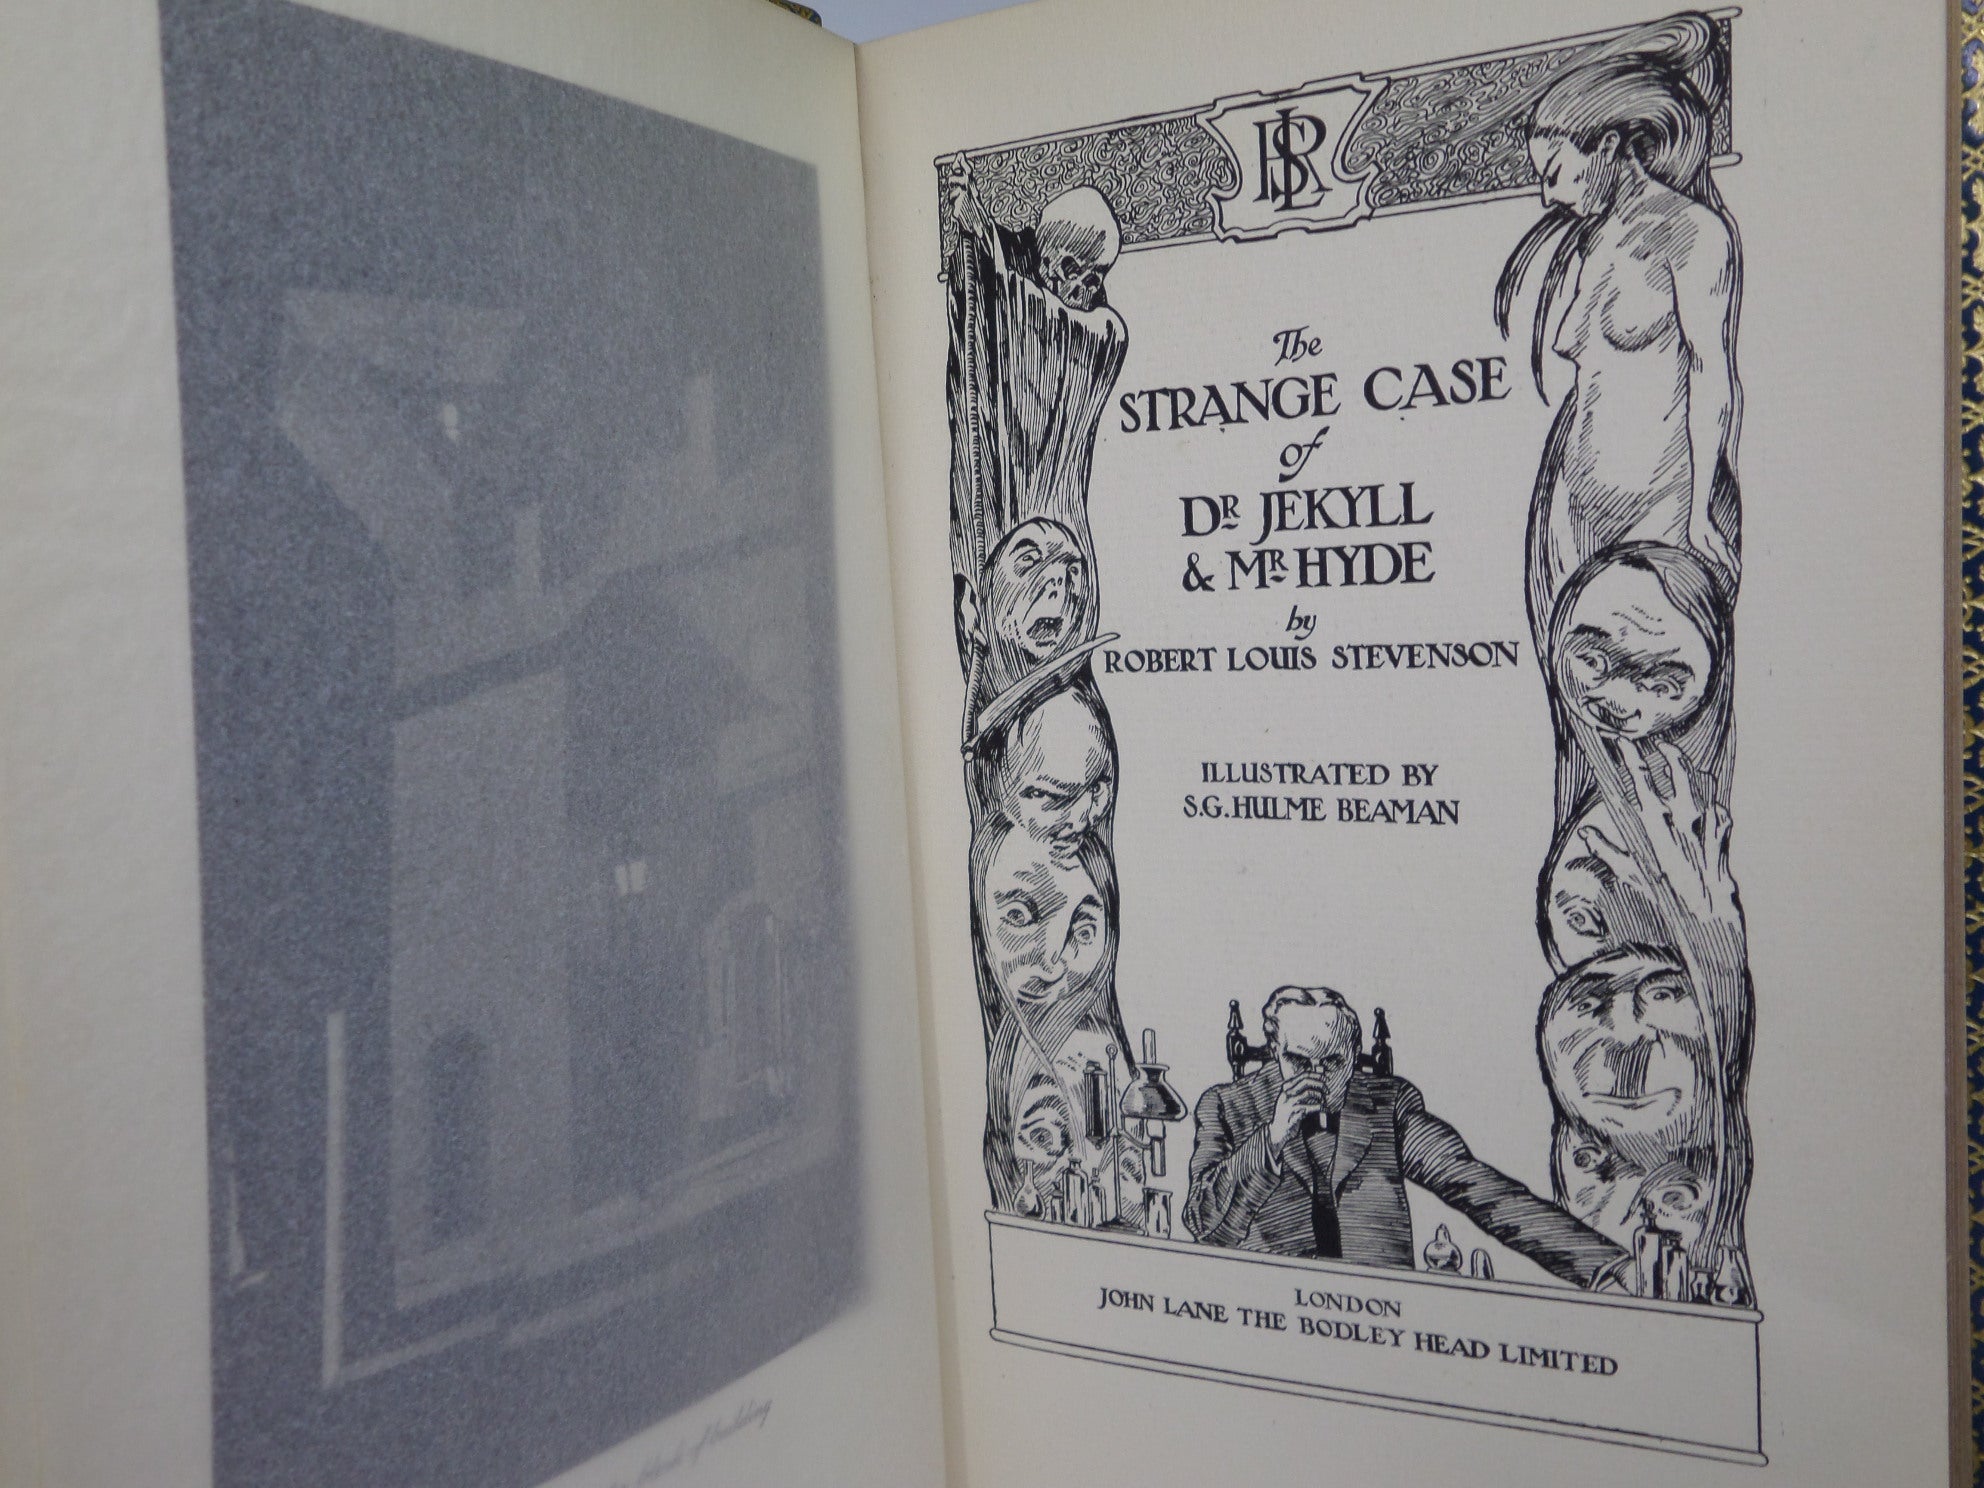 THE STRANGE CASE OF DR JEKYLL & MR HYDE BY ROBERT LOUIS STEVENSON 1930 FINELY BOUND BY BAYNTUN, ILLUSTRATED BY S.G. HULME BEAMAN